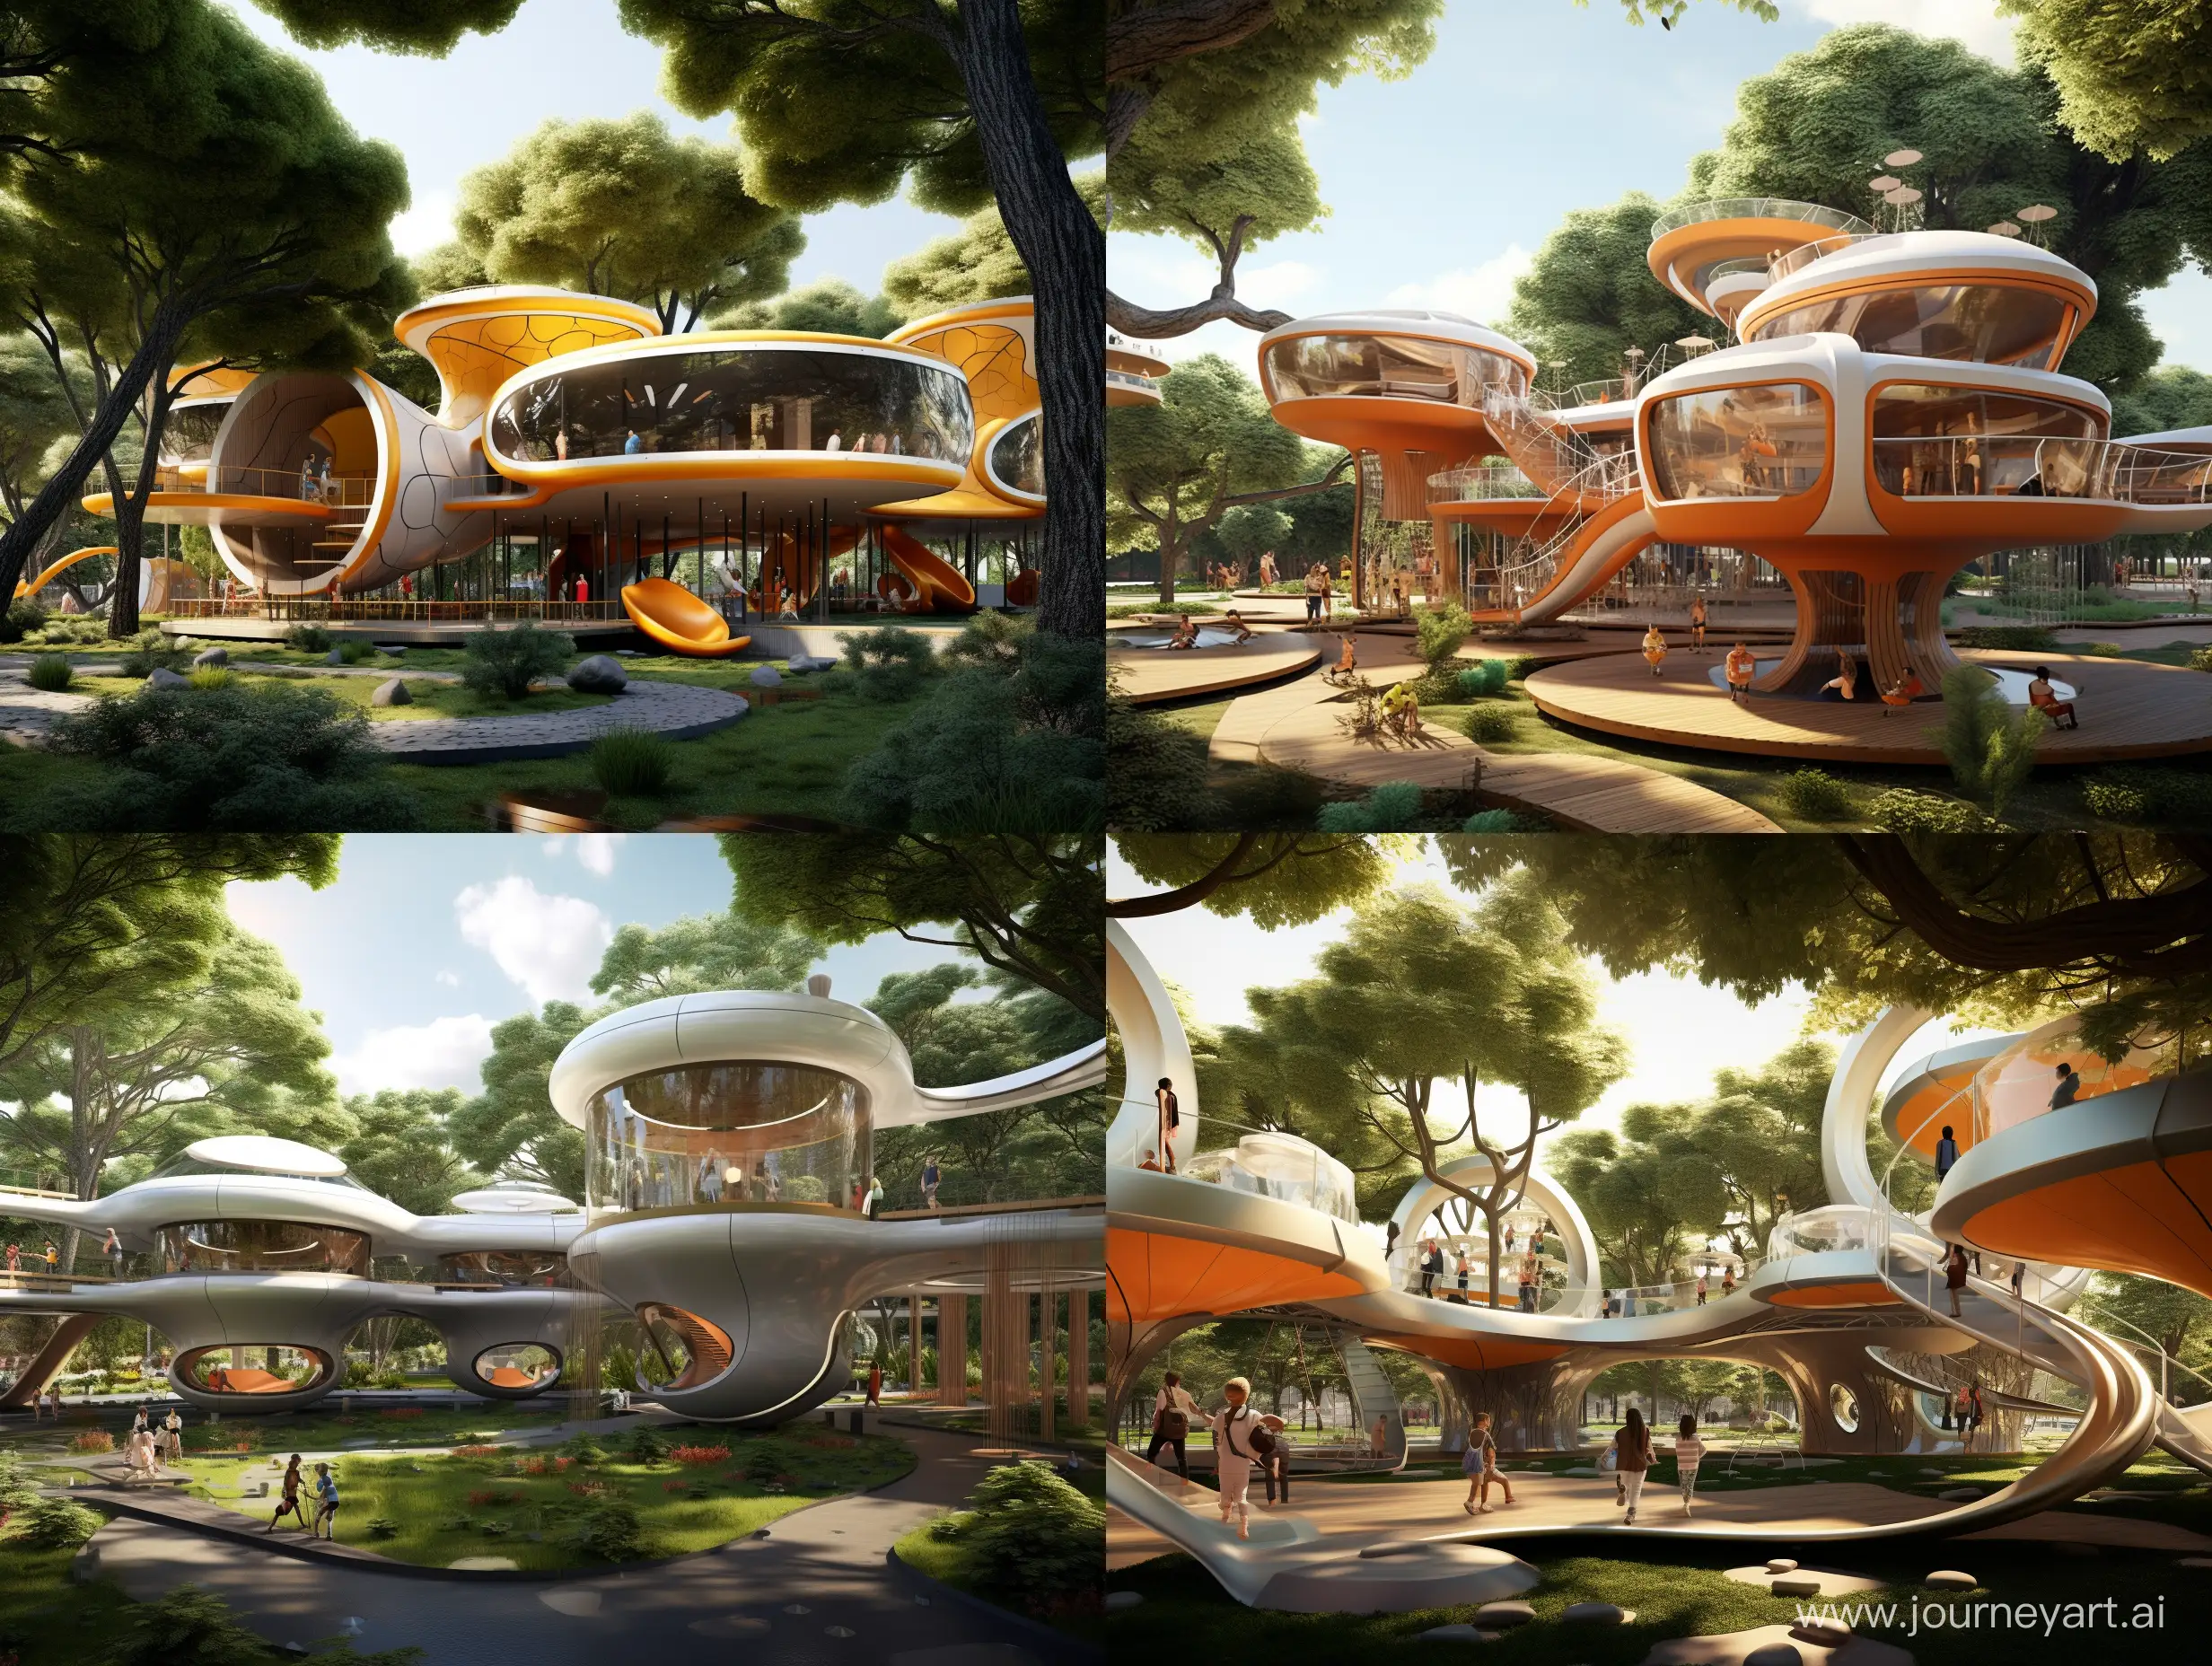 Futuristic-Childrens-Play-Area-with-Floating-Roof-Amidst-Trees